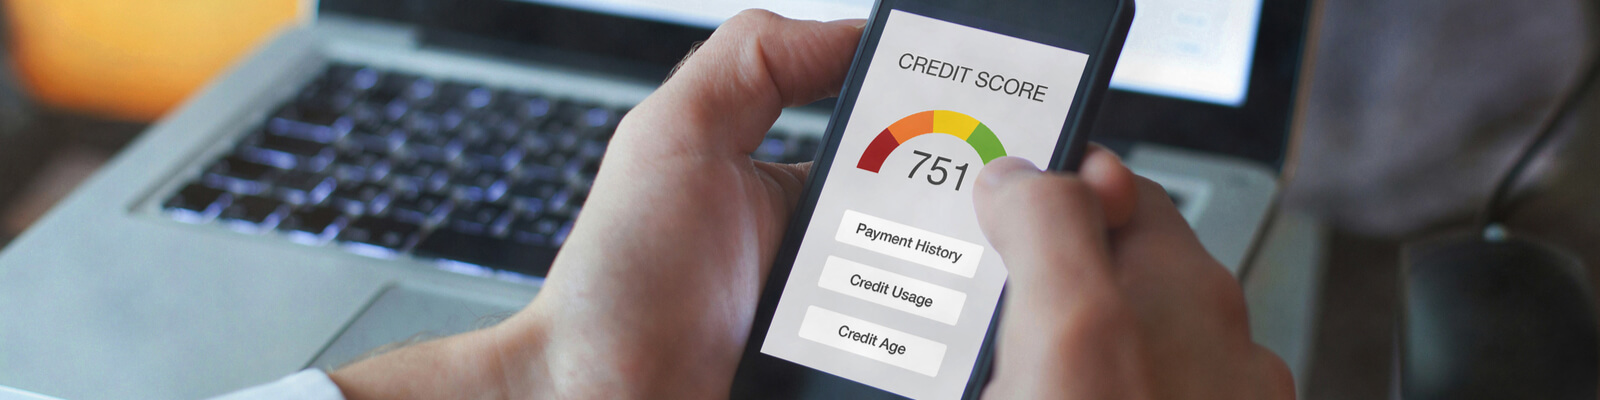 keeping strong credit score during recession